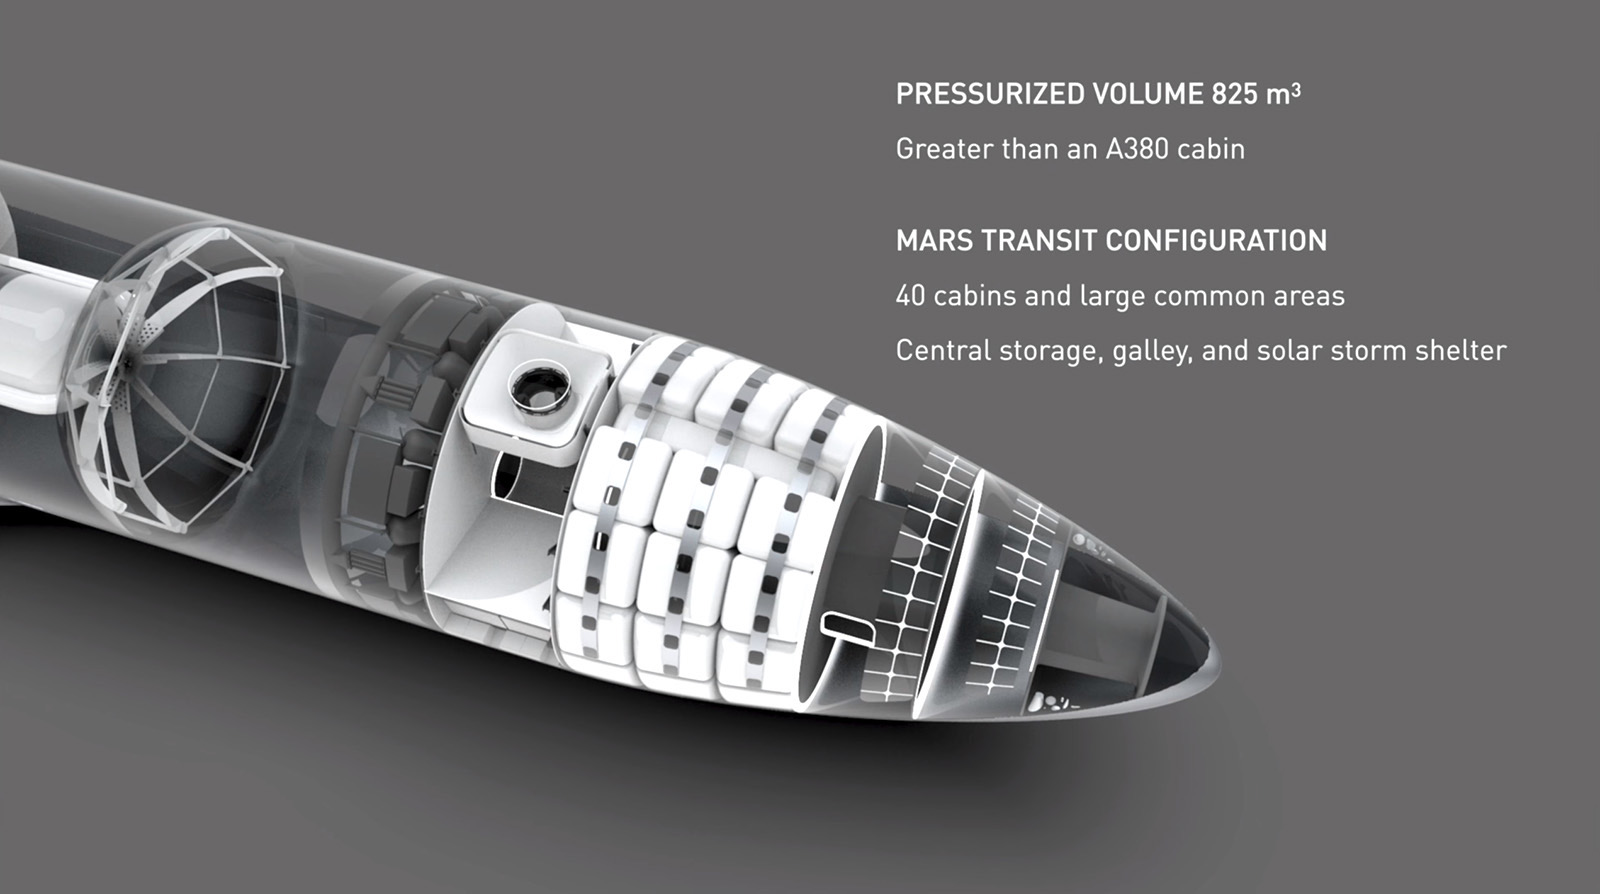 SpaceX’s Reusable Rockets Could Revolutionize Warfare